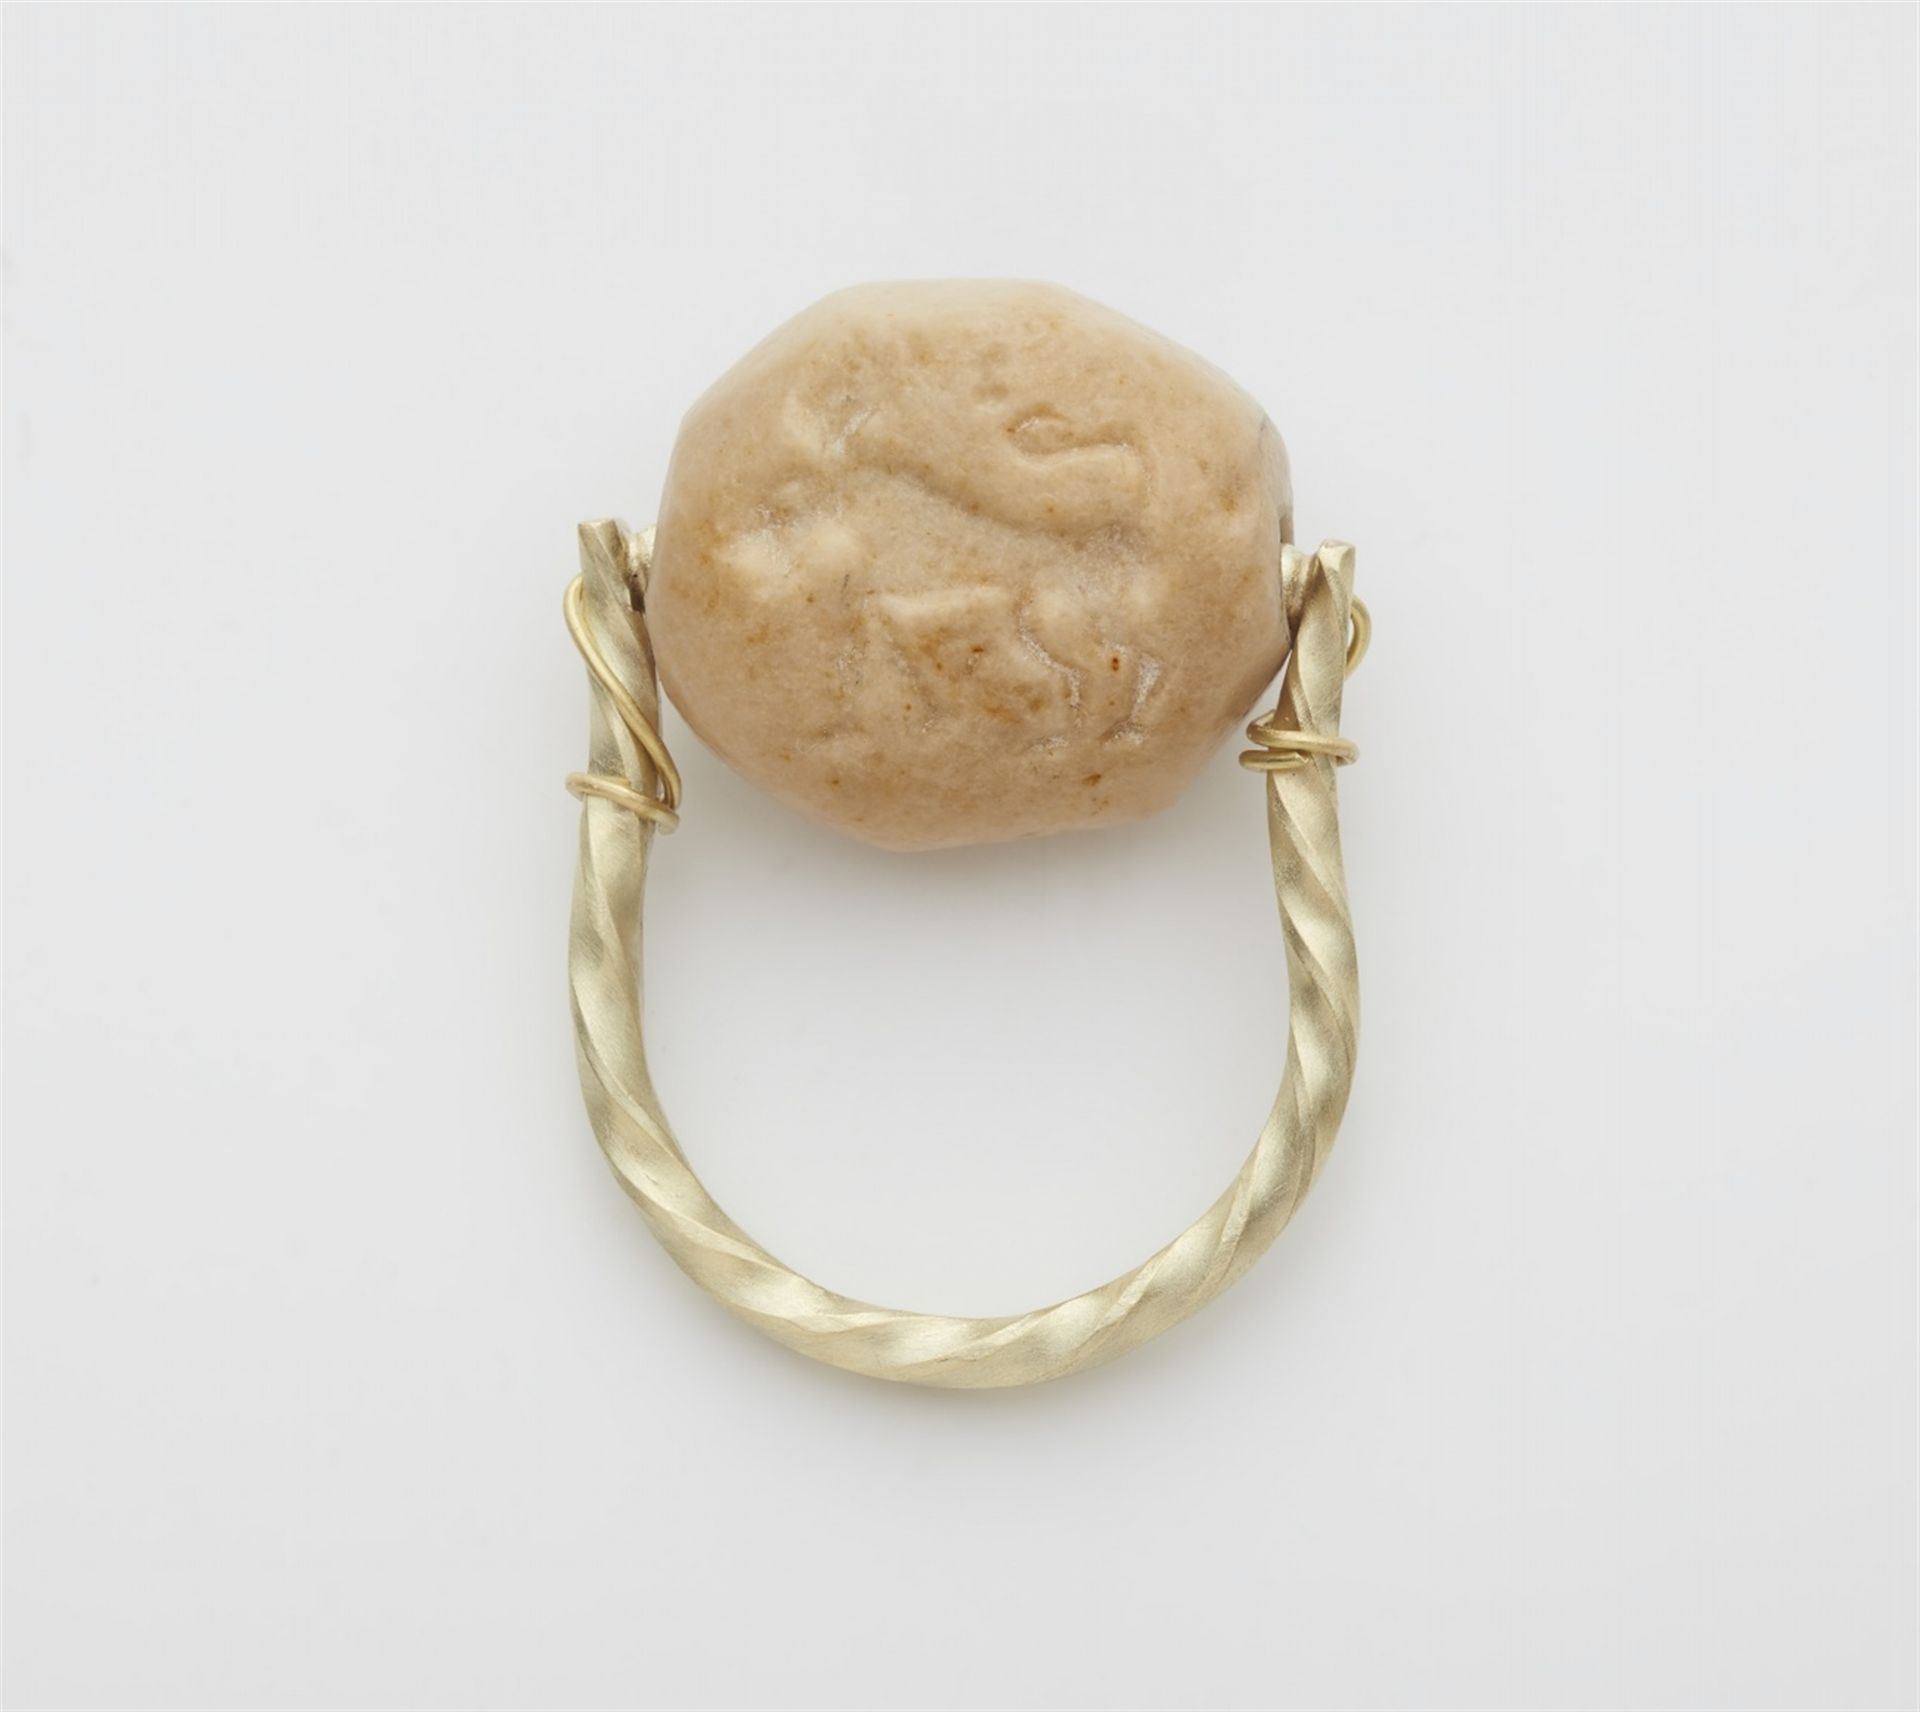 A 14k gold ring with an ancient intaglio